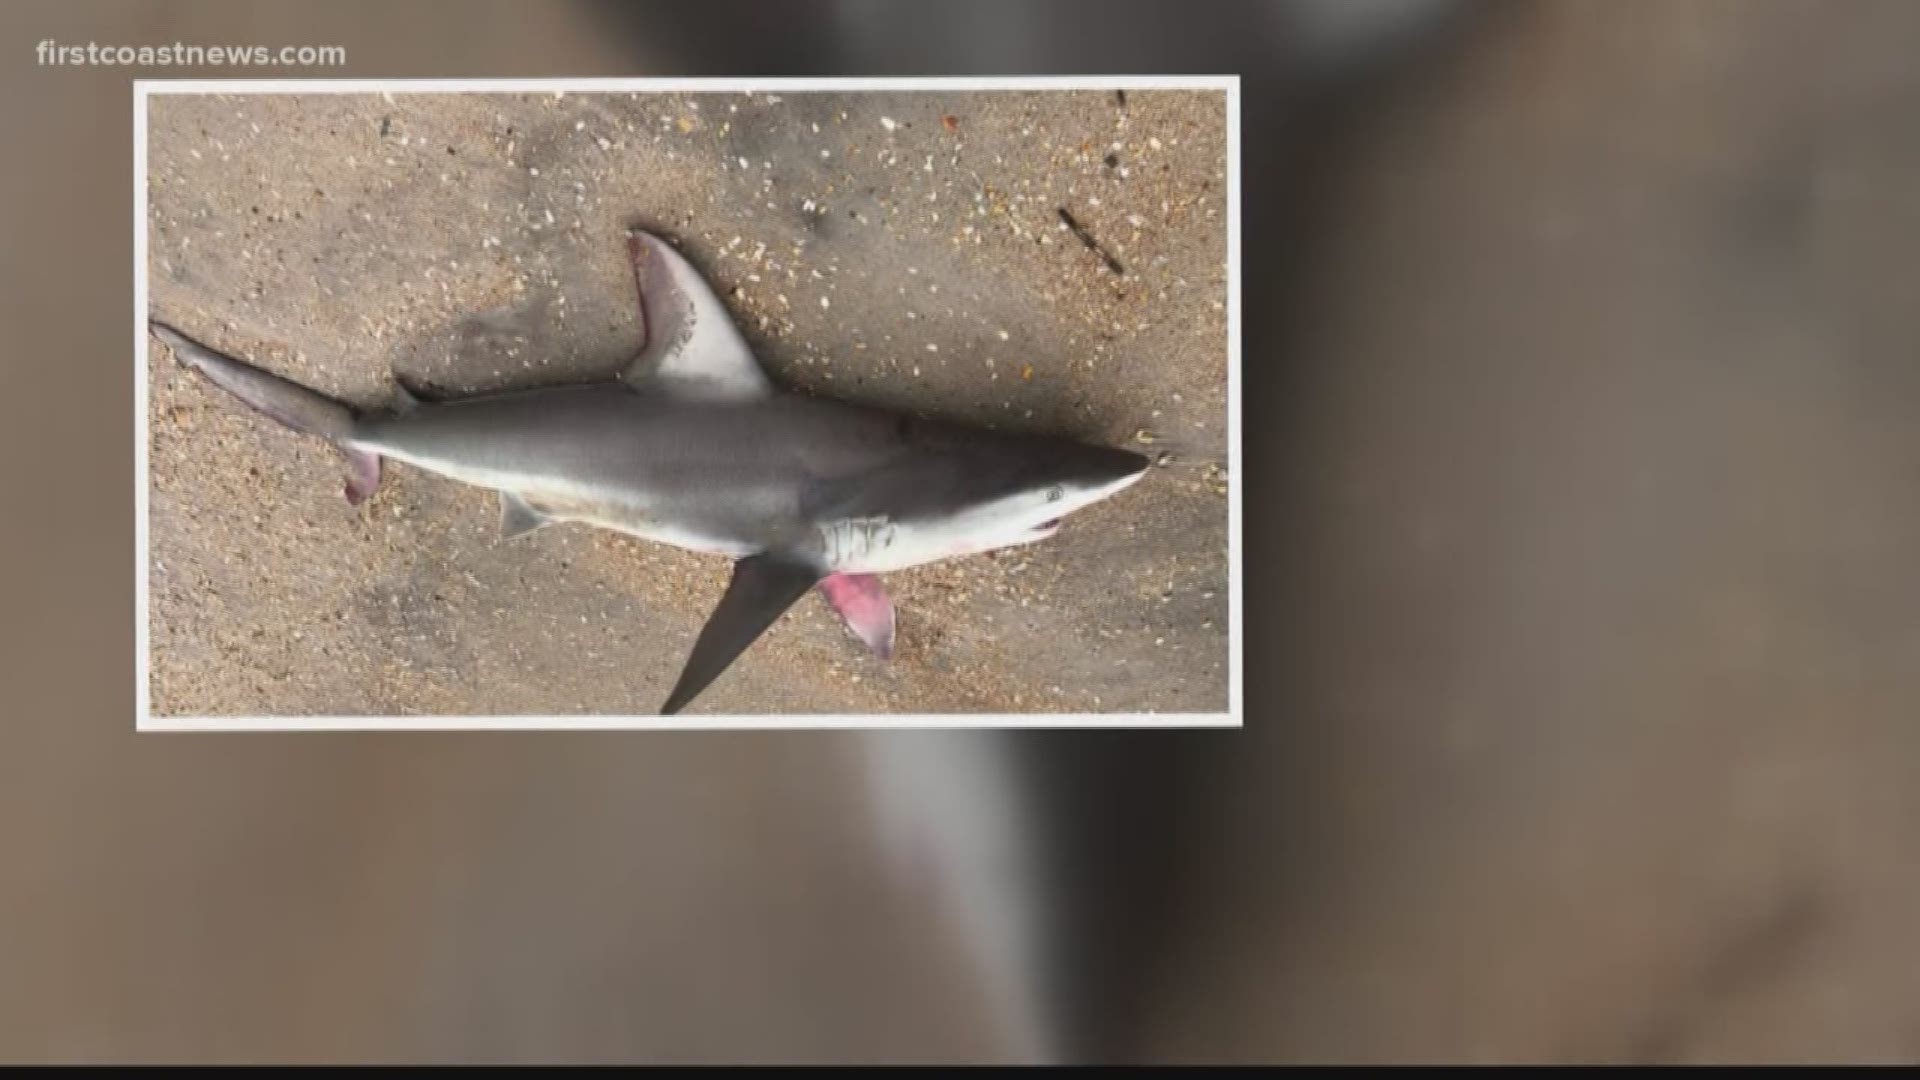 Officials say there's a chance the shark died due to illness from ingesting plastic and trash from the ocean.